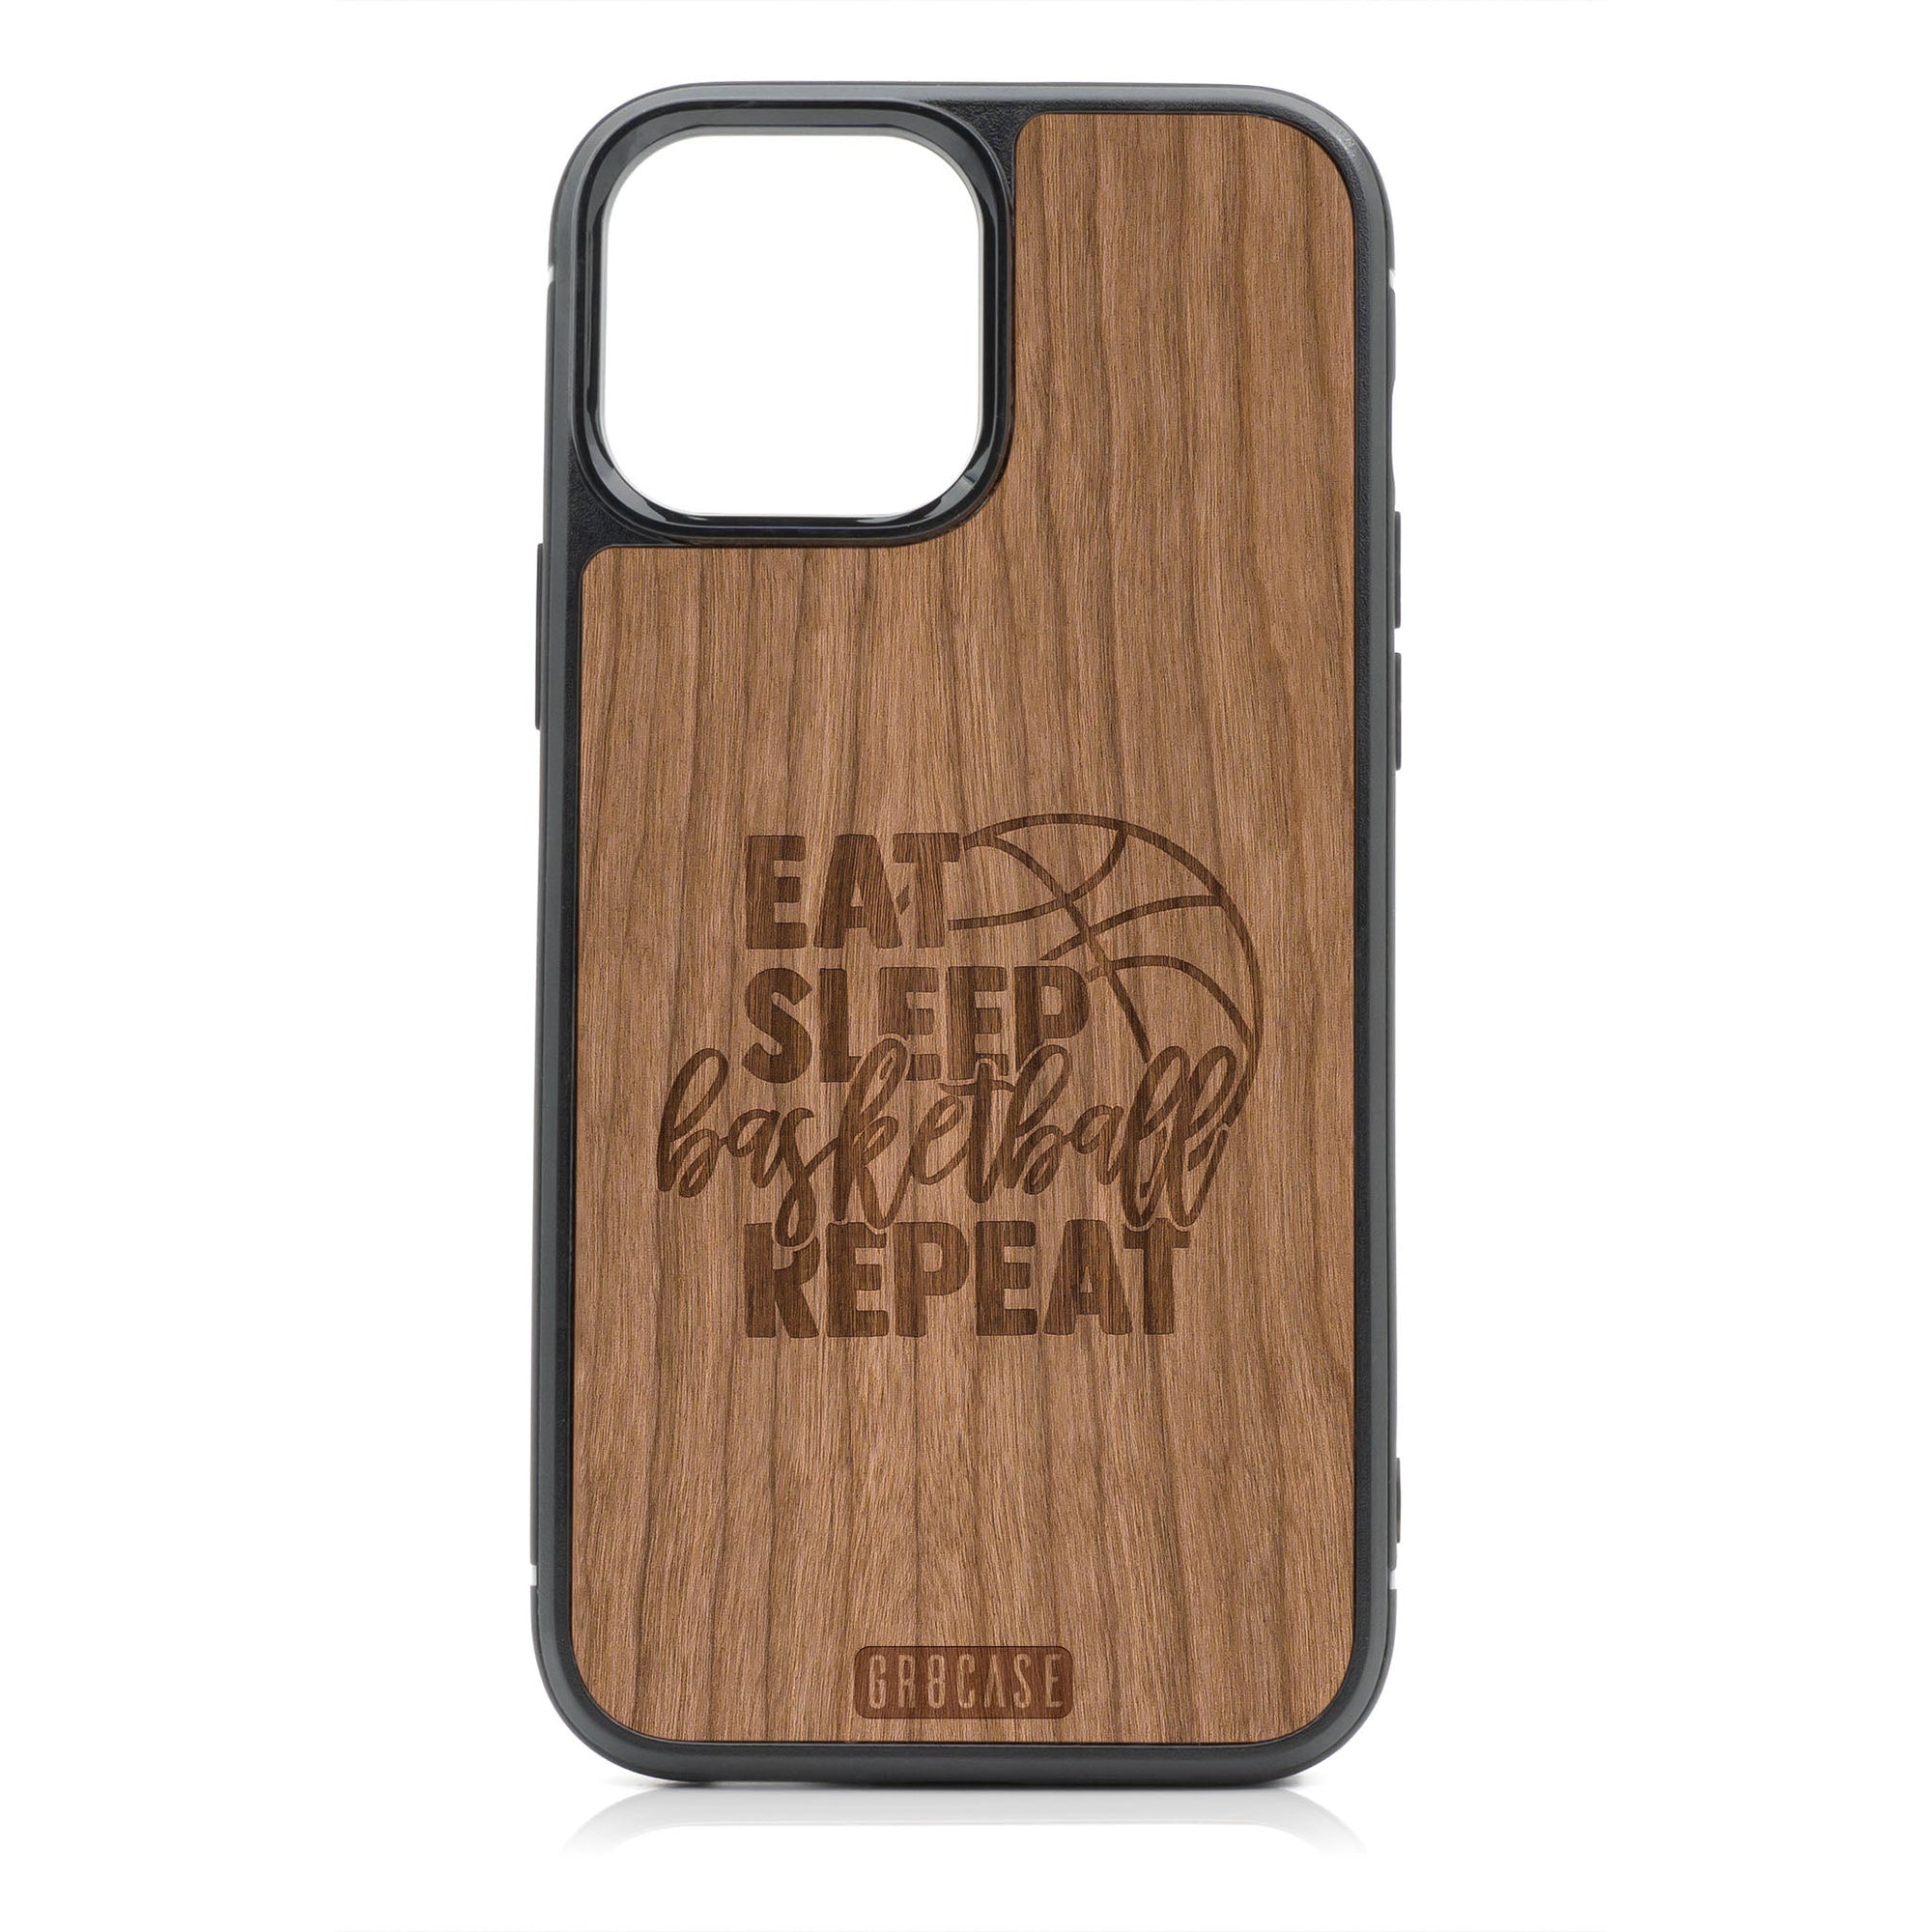 Eat Sleep Basketball Repeat Design Wood Case For iPhone 14 Pro Max